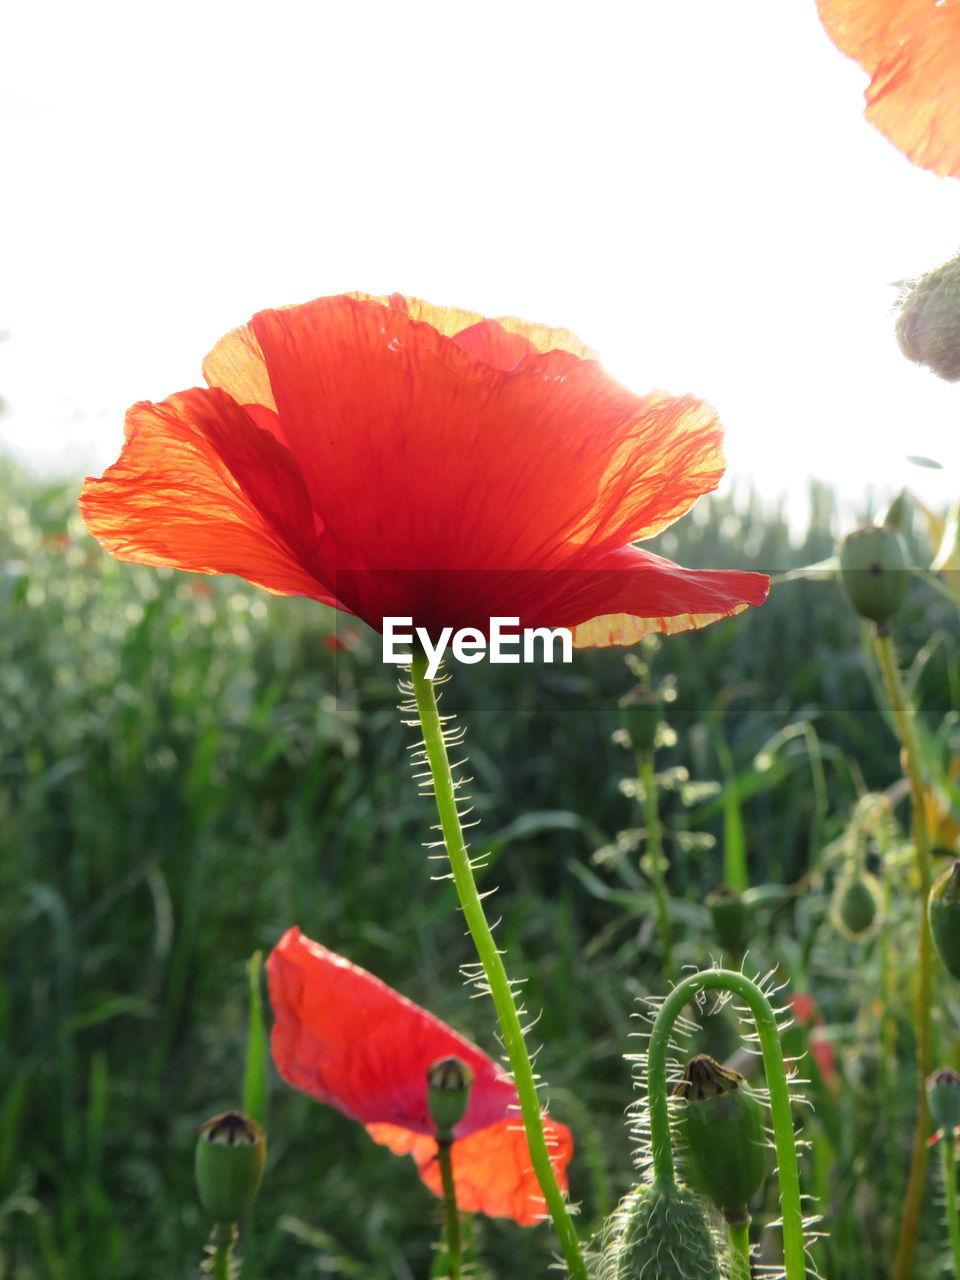 plant, flower, red, nature, beauty in nature, flowering plant, poppy, growth, freshness, close-up, petal, no people, flower head, fragility, orange color, outdoors, leaf, plant part, inflorescence, day, focus on foreground, tree, hibiscus, green